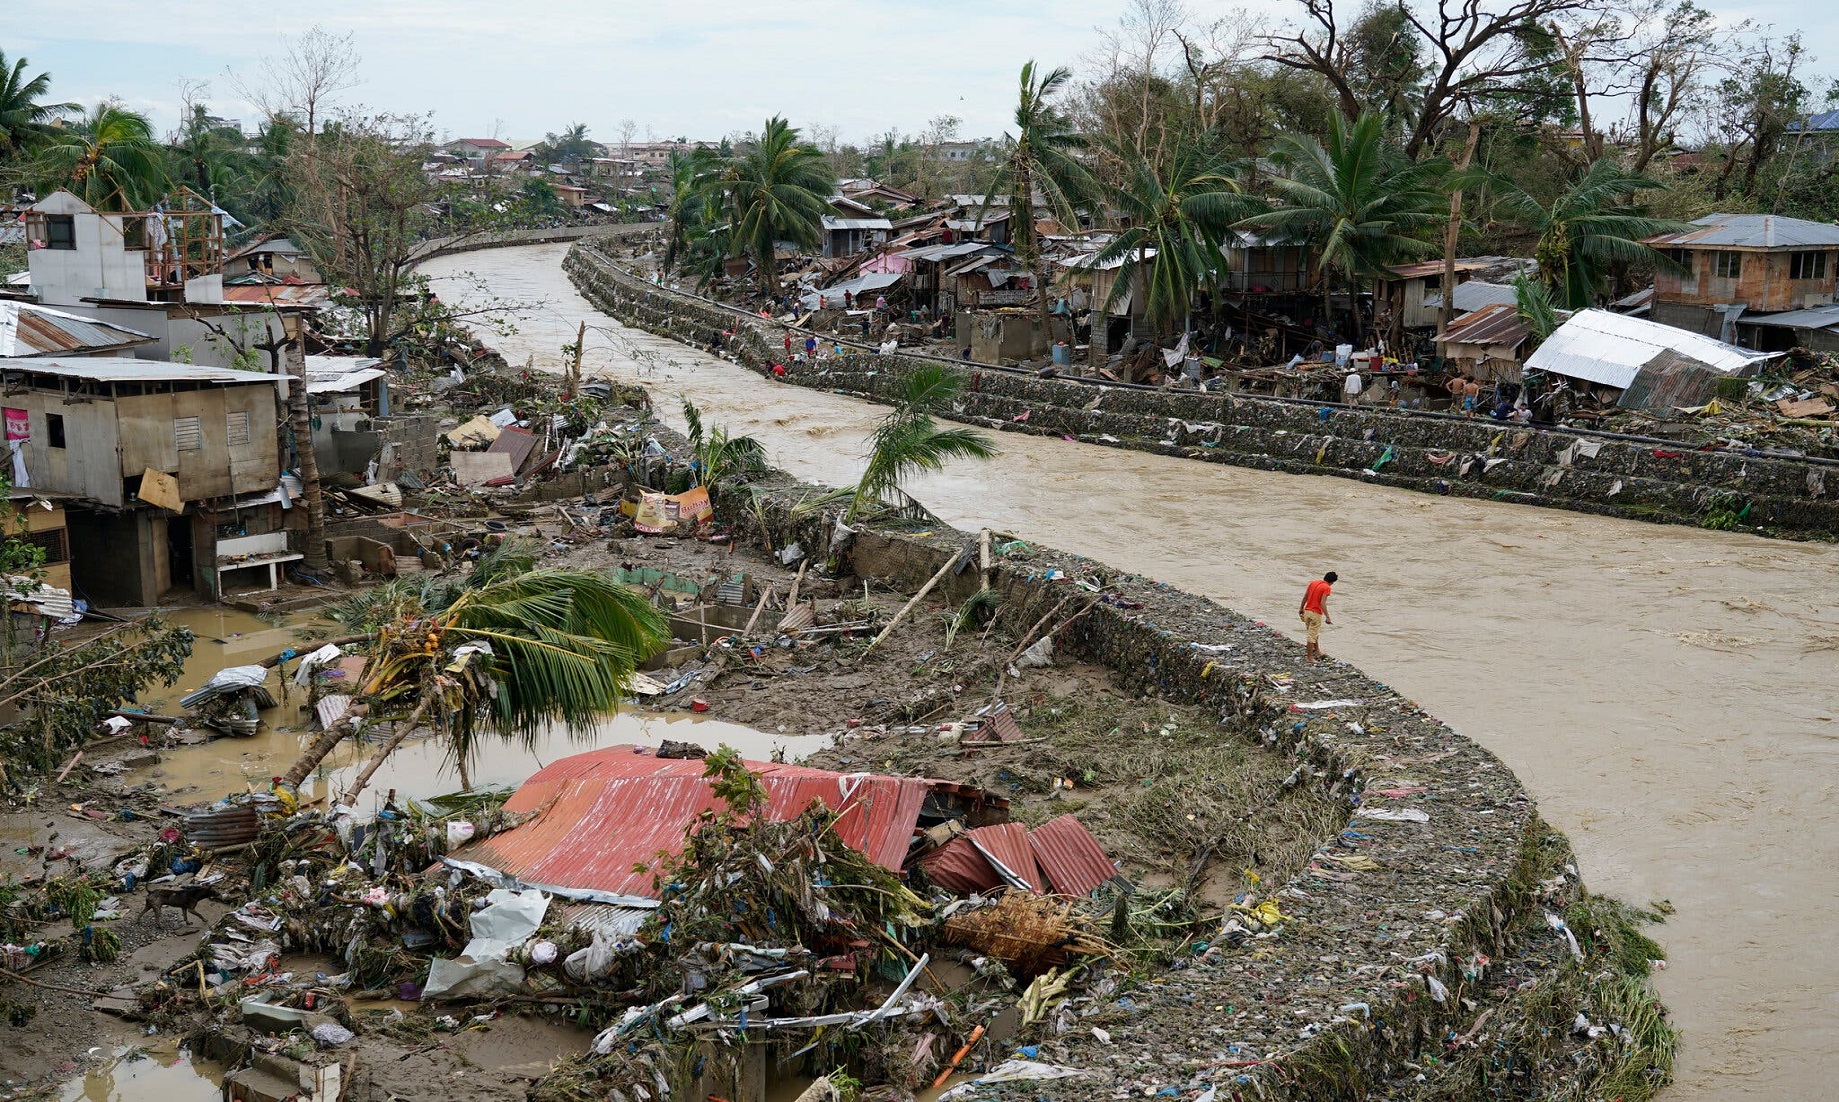 Death toll in Philippines from Typhoon Rai rises to 144: local officials